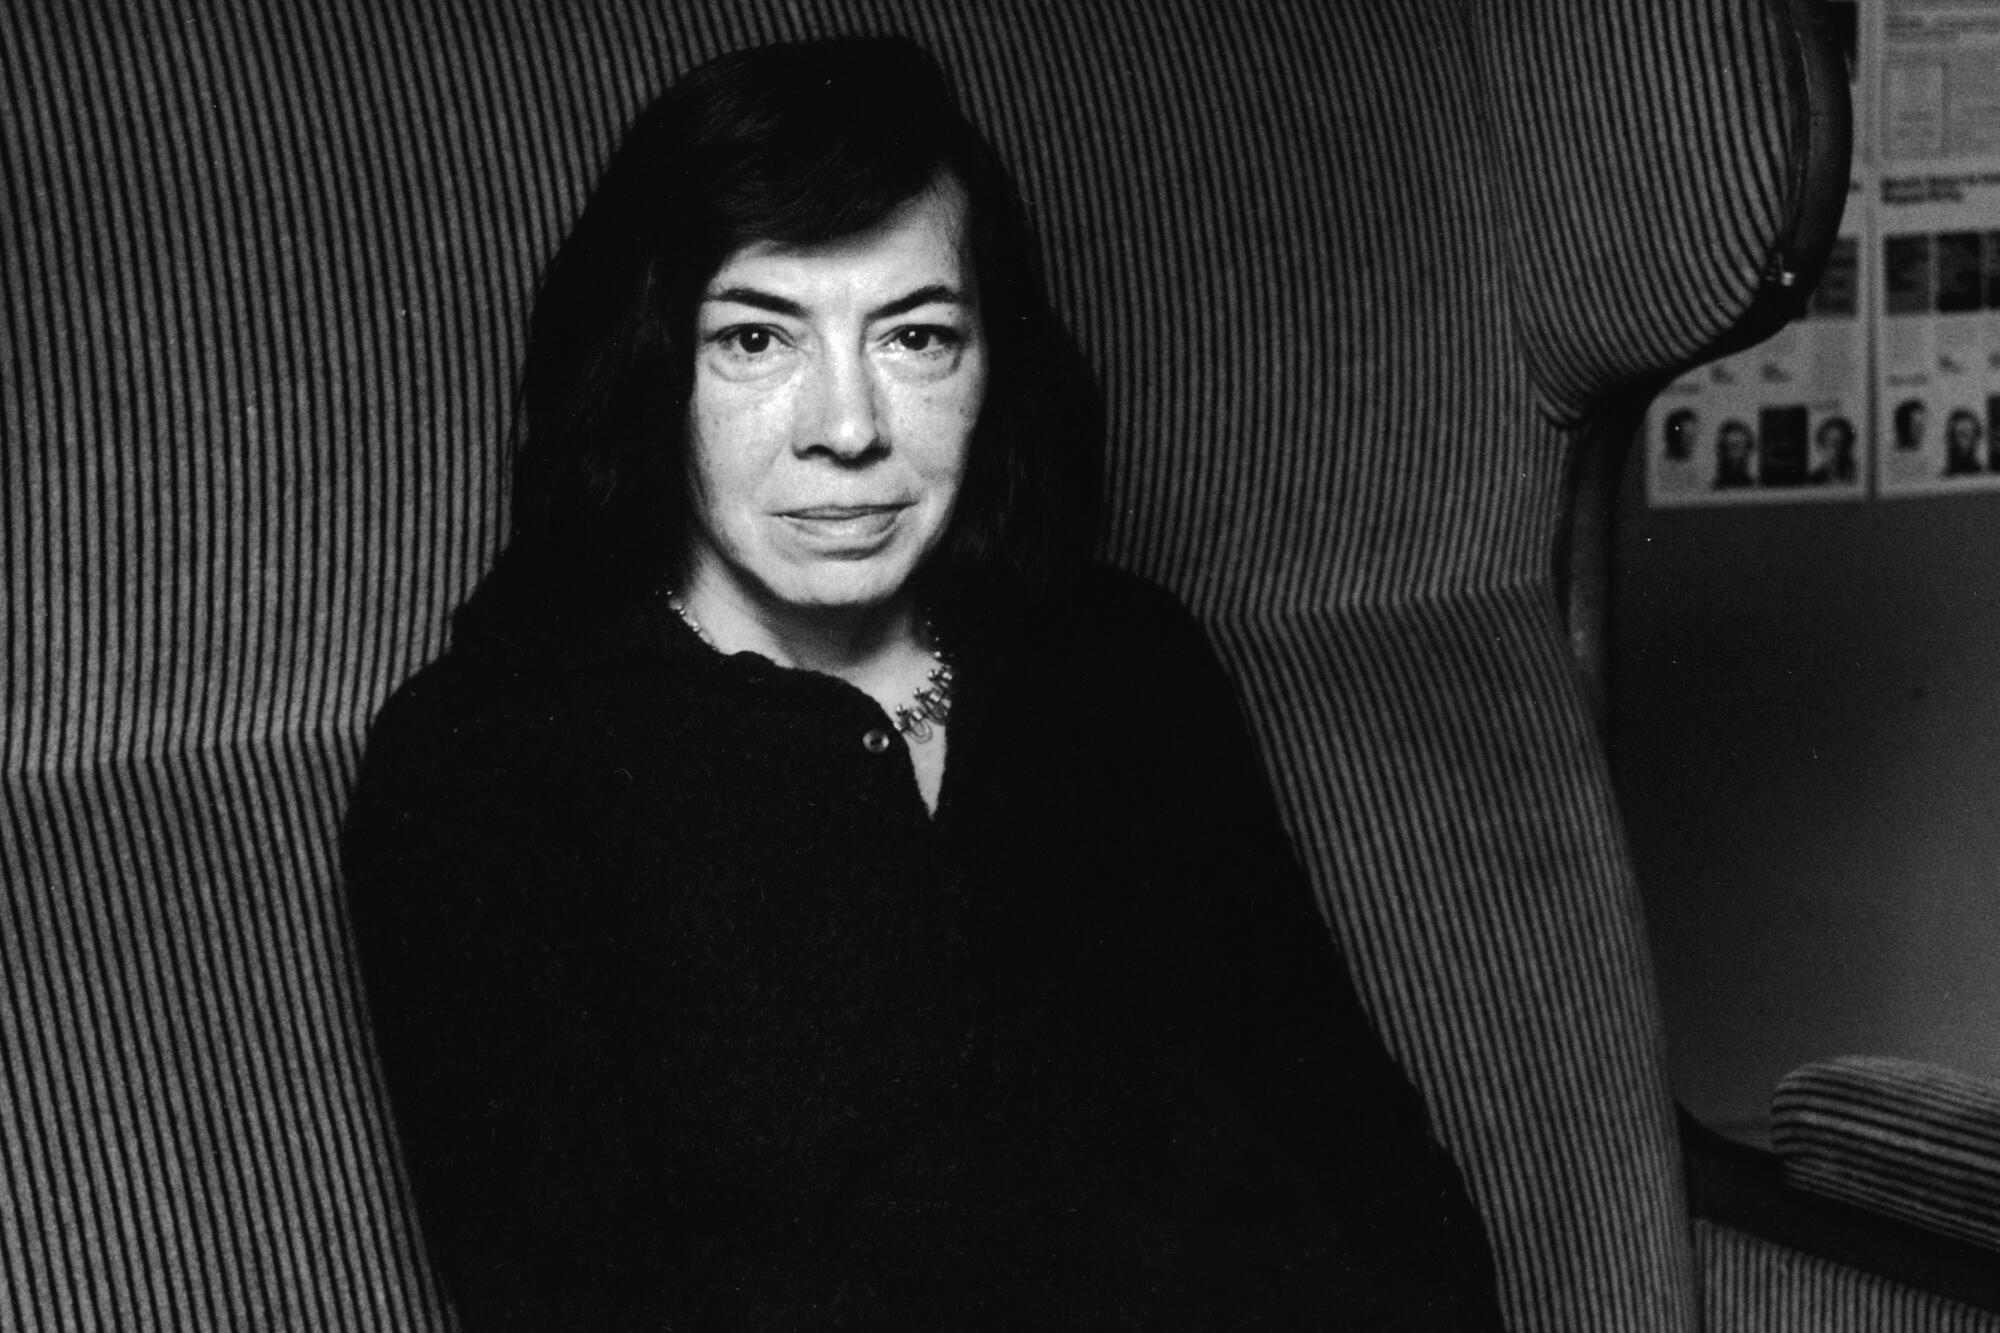 Mystery author Patricia Highsmith, whose edited diaries and notebooks are being released 26 years after her death.